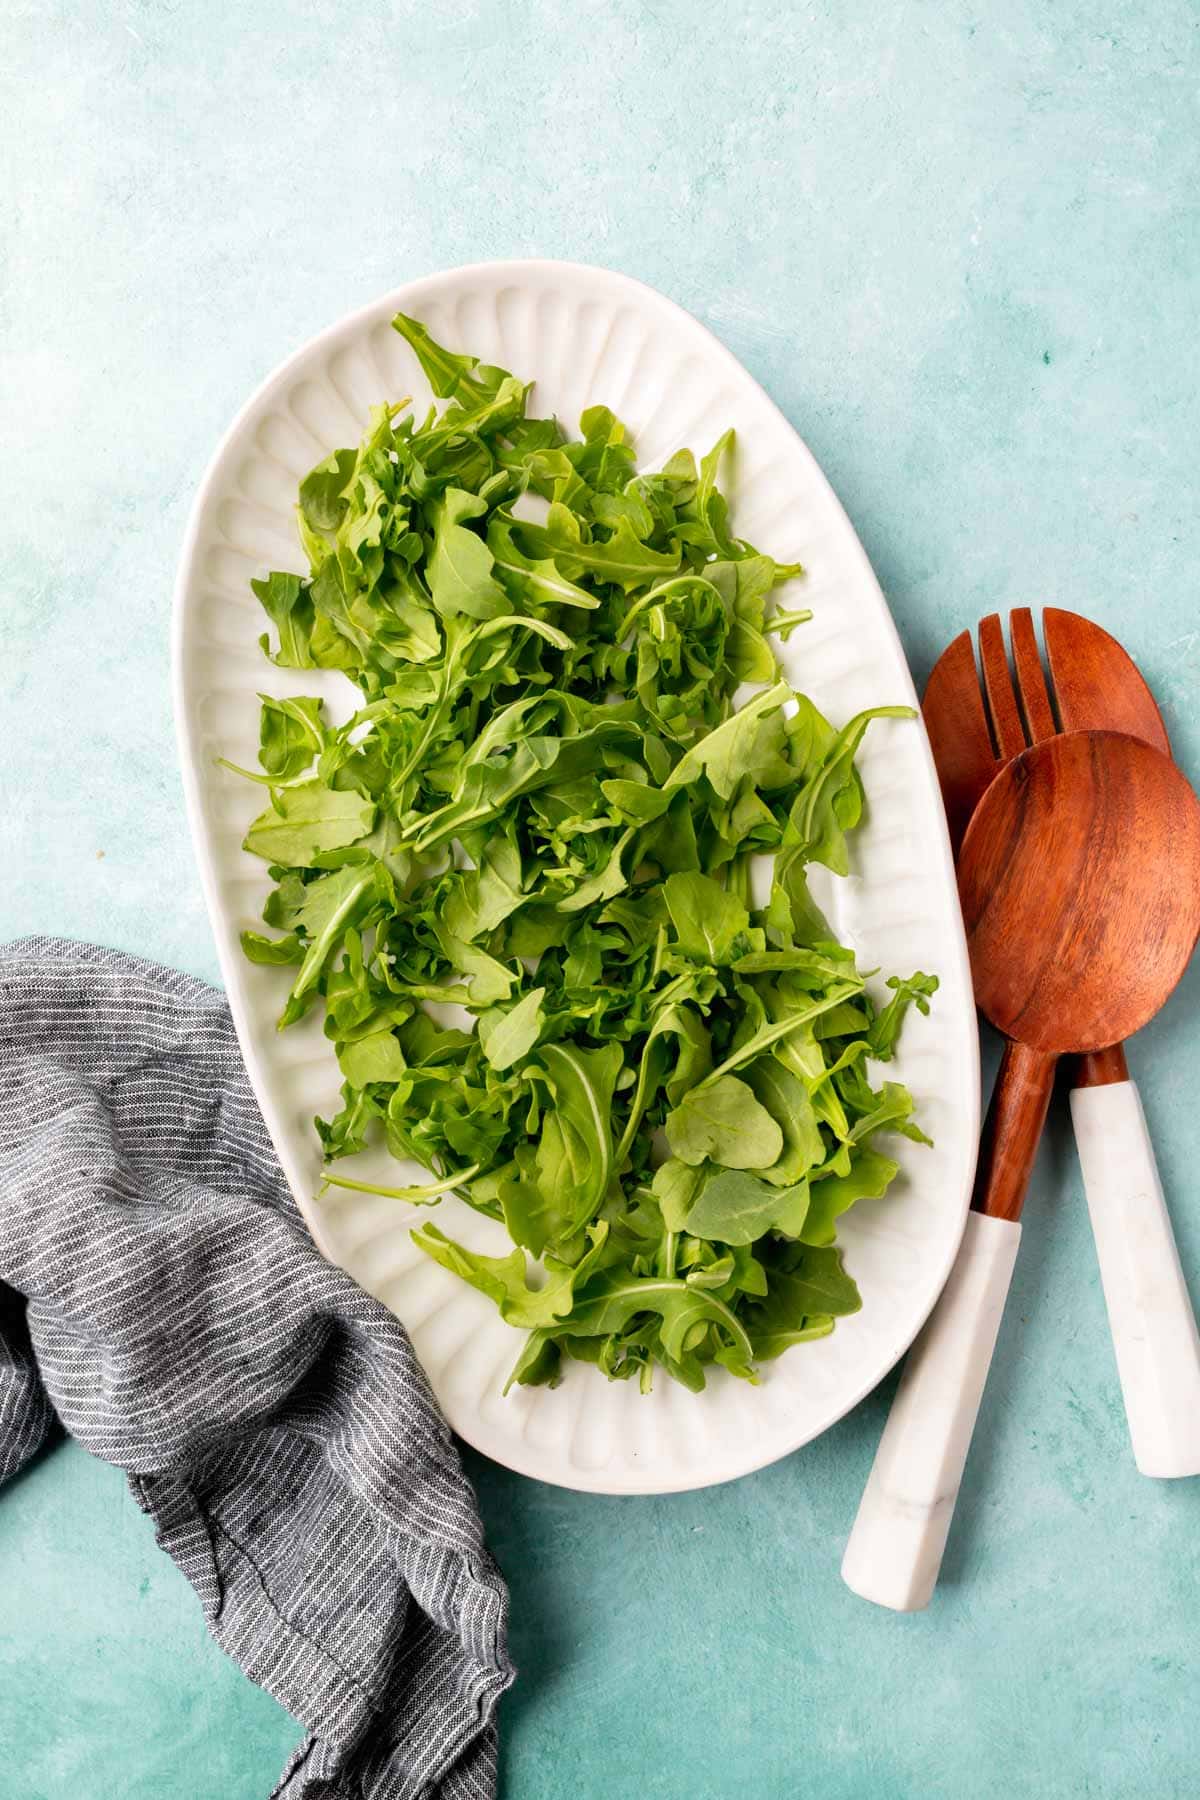 A large oval platter of arugula sitting on a bright blue table with wood and marble salad tongs to the side.